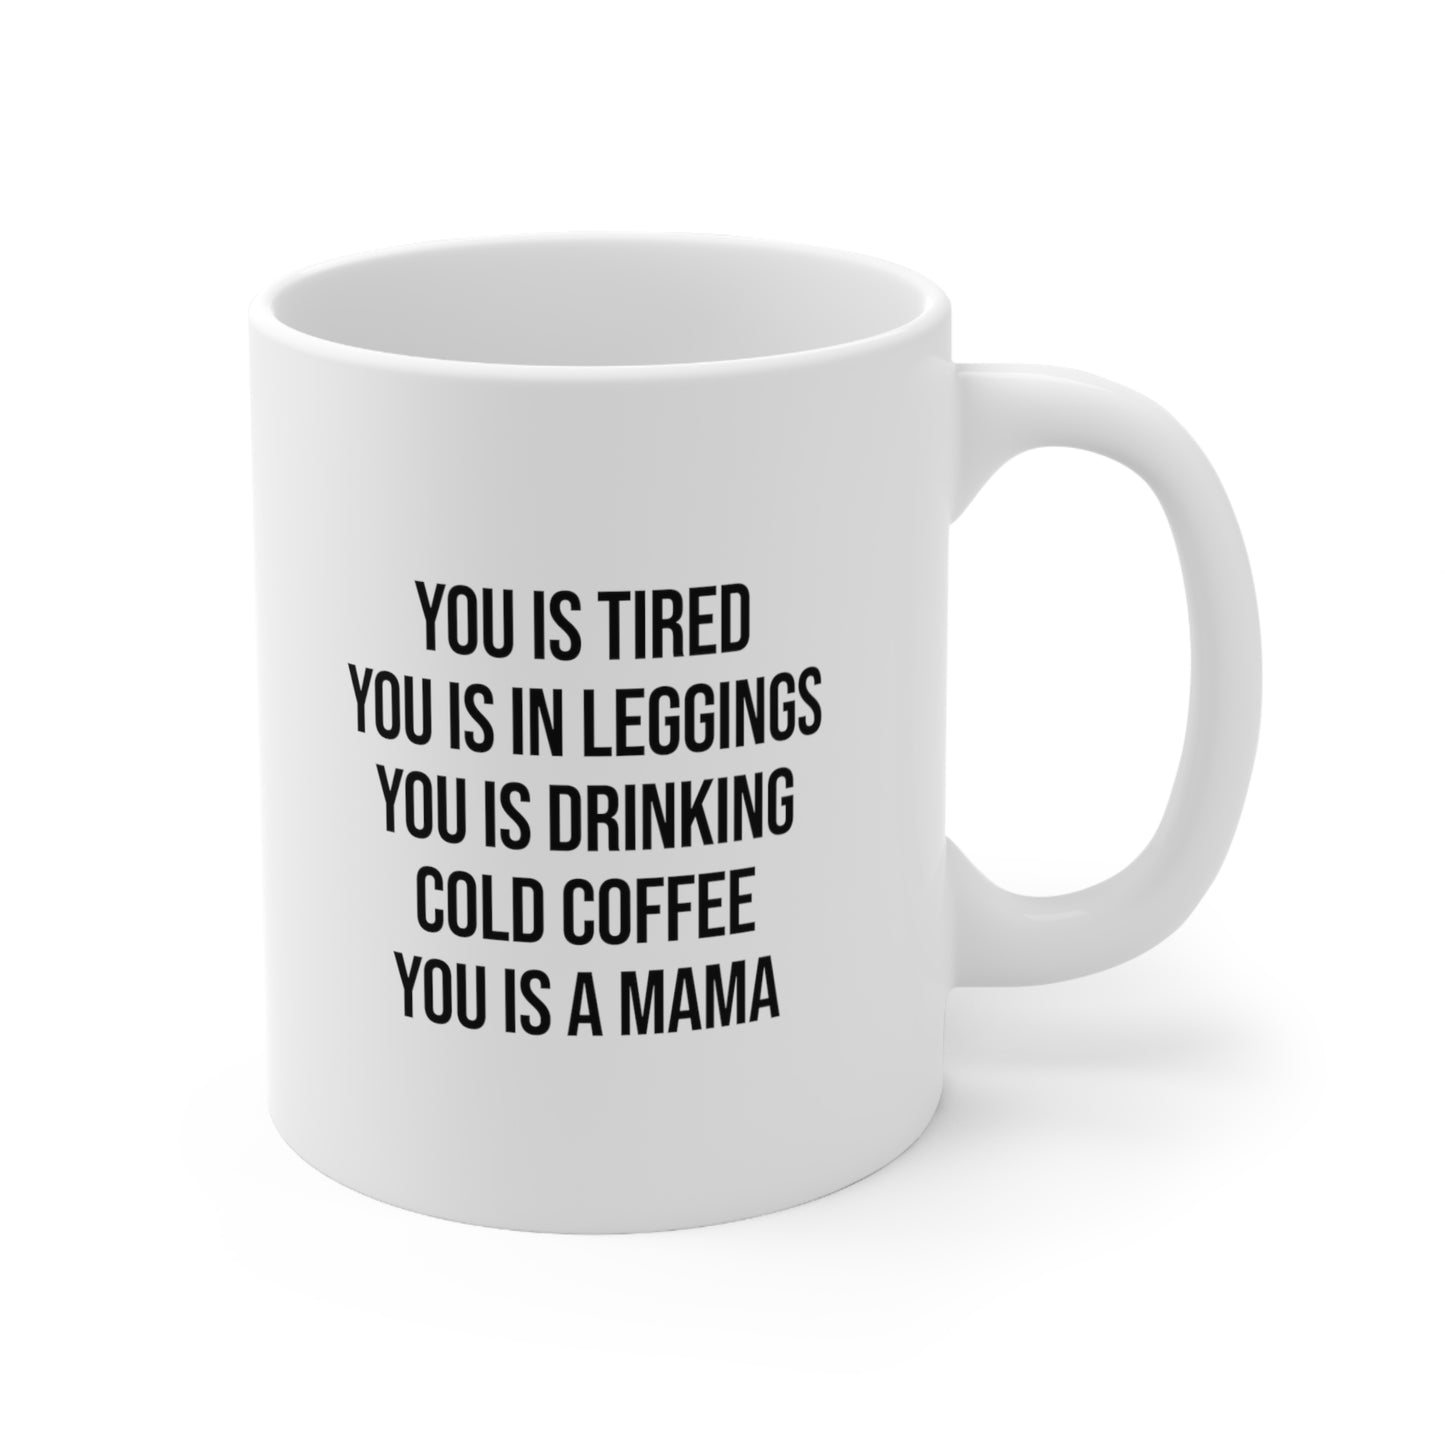 You Is Tired You Is In Leggings You Is Drinking Cold Coffee You Is A Mama Coffee Mug 11oz